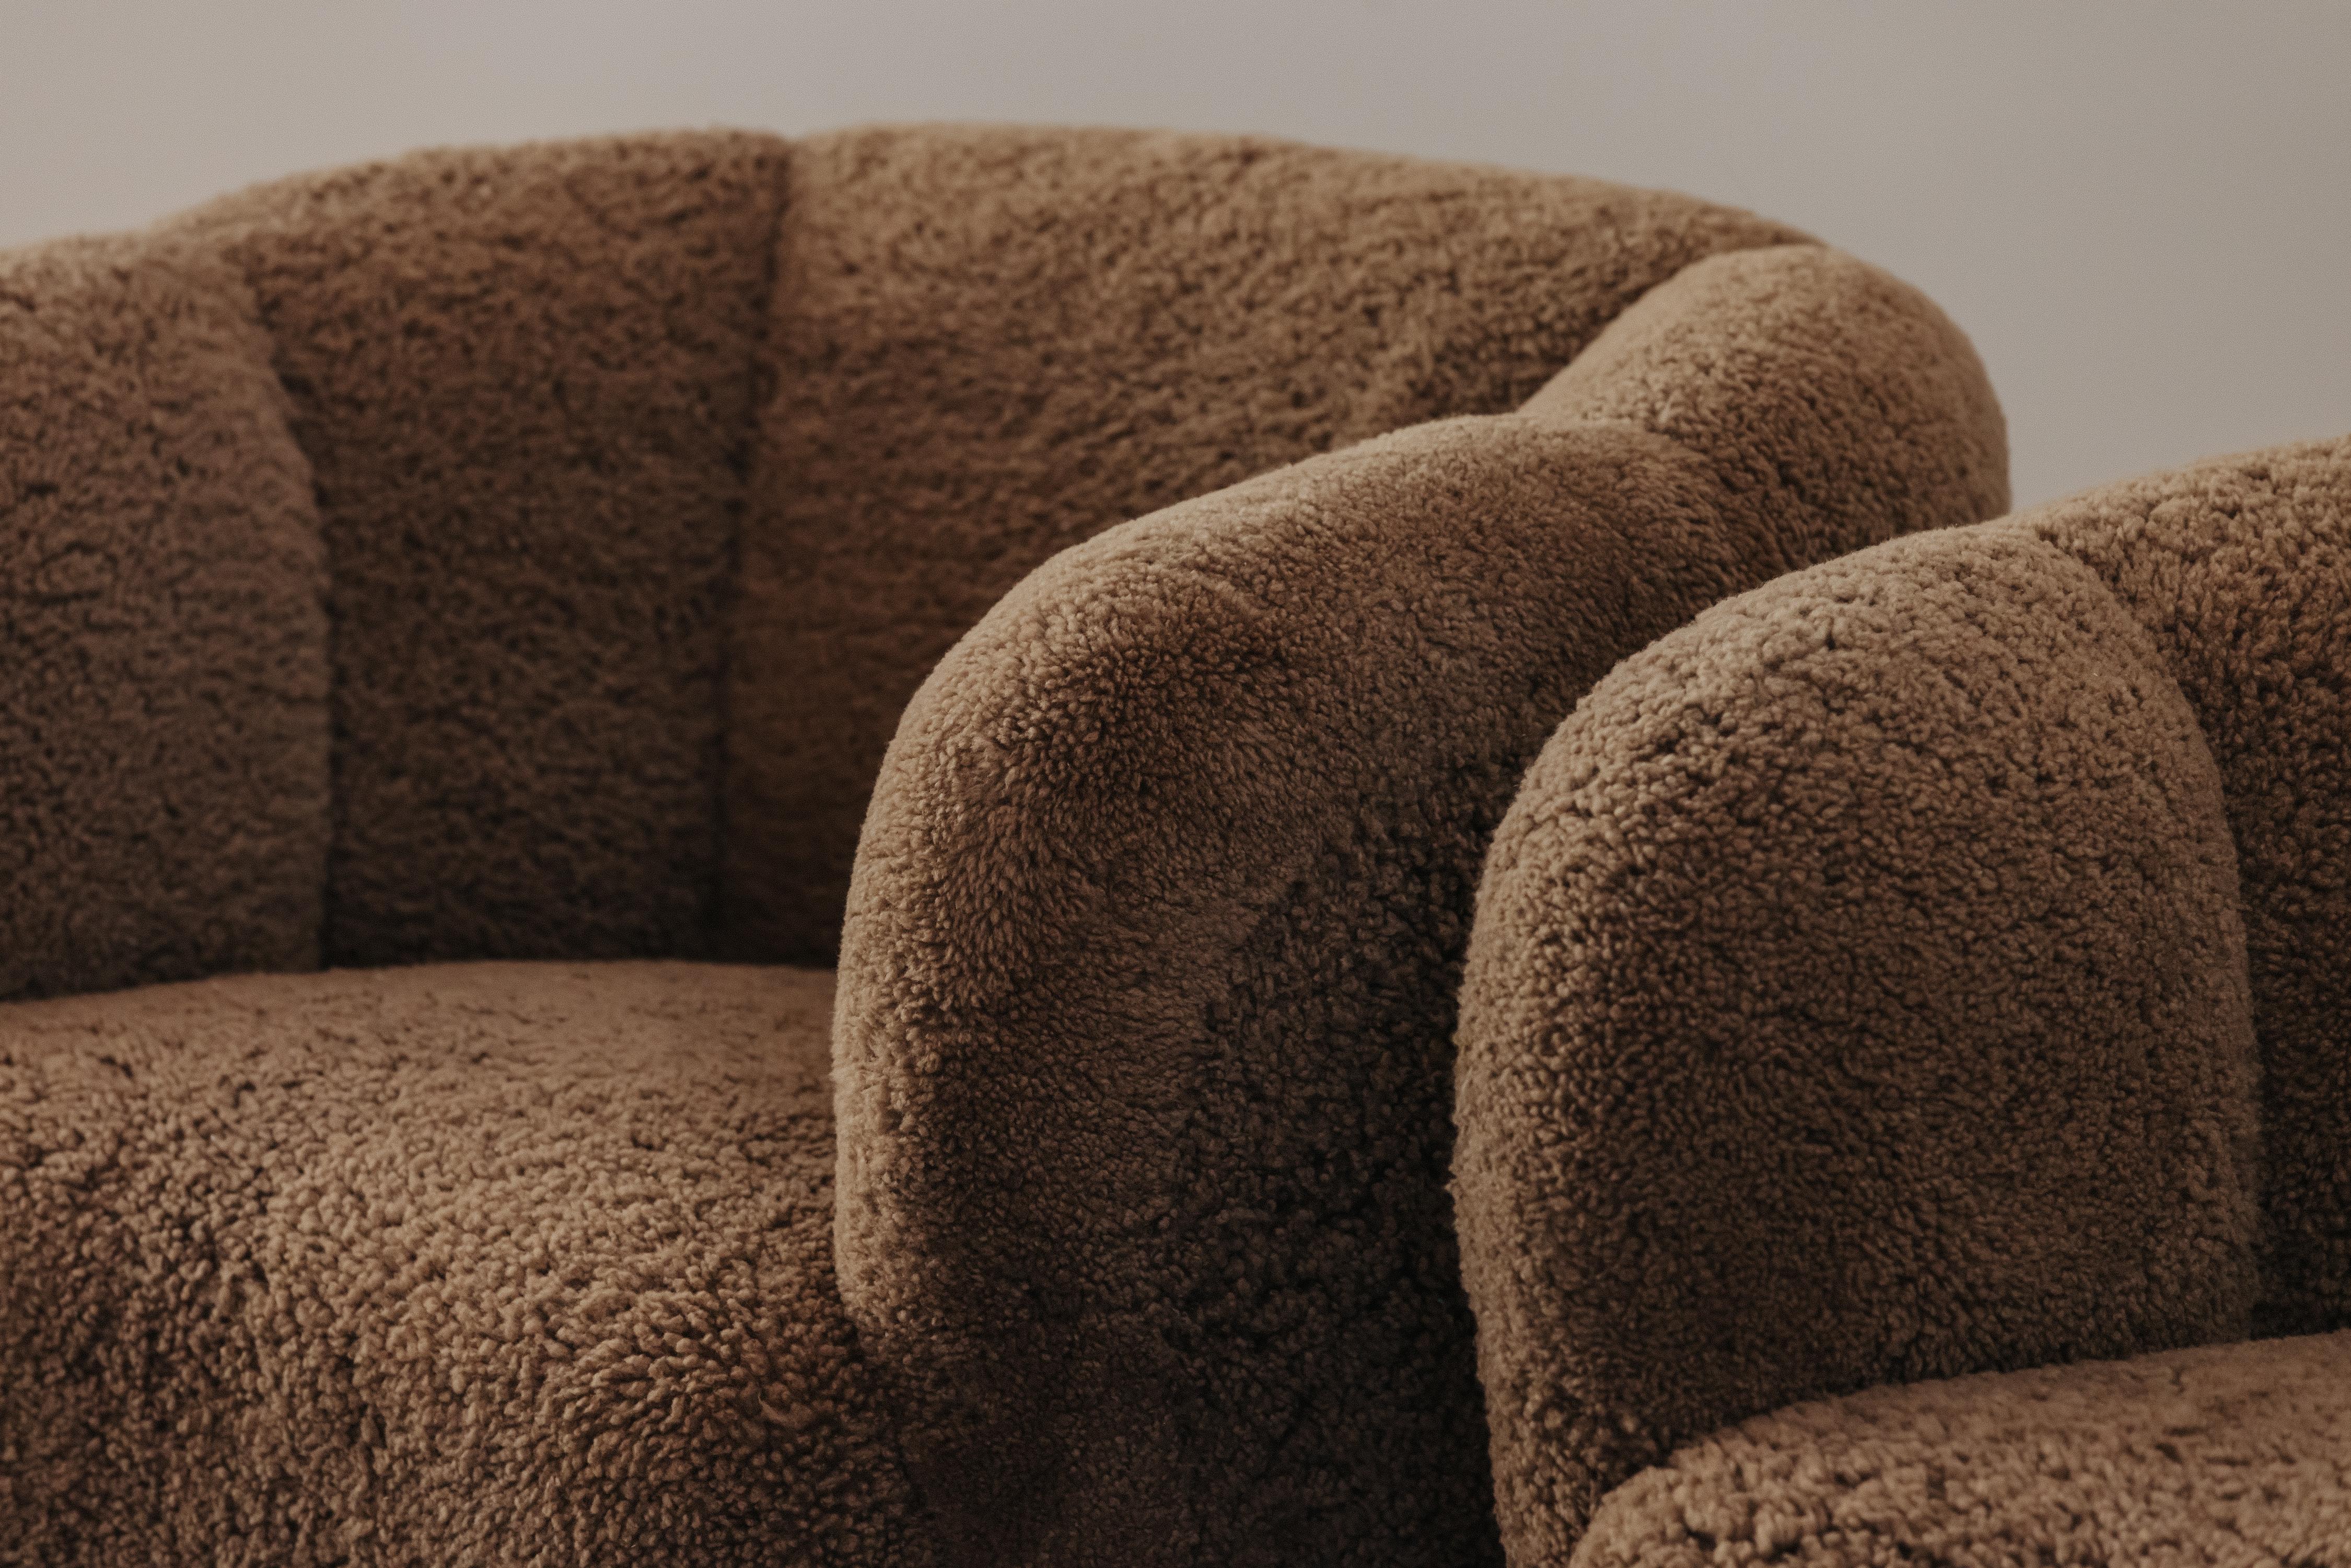 European Vintage Pair Of Shearling Lounge Chairs From Denmark, Circa 1960